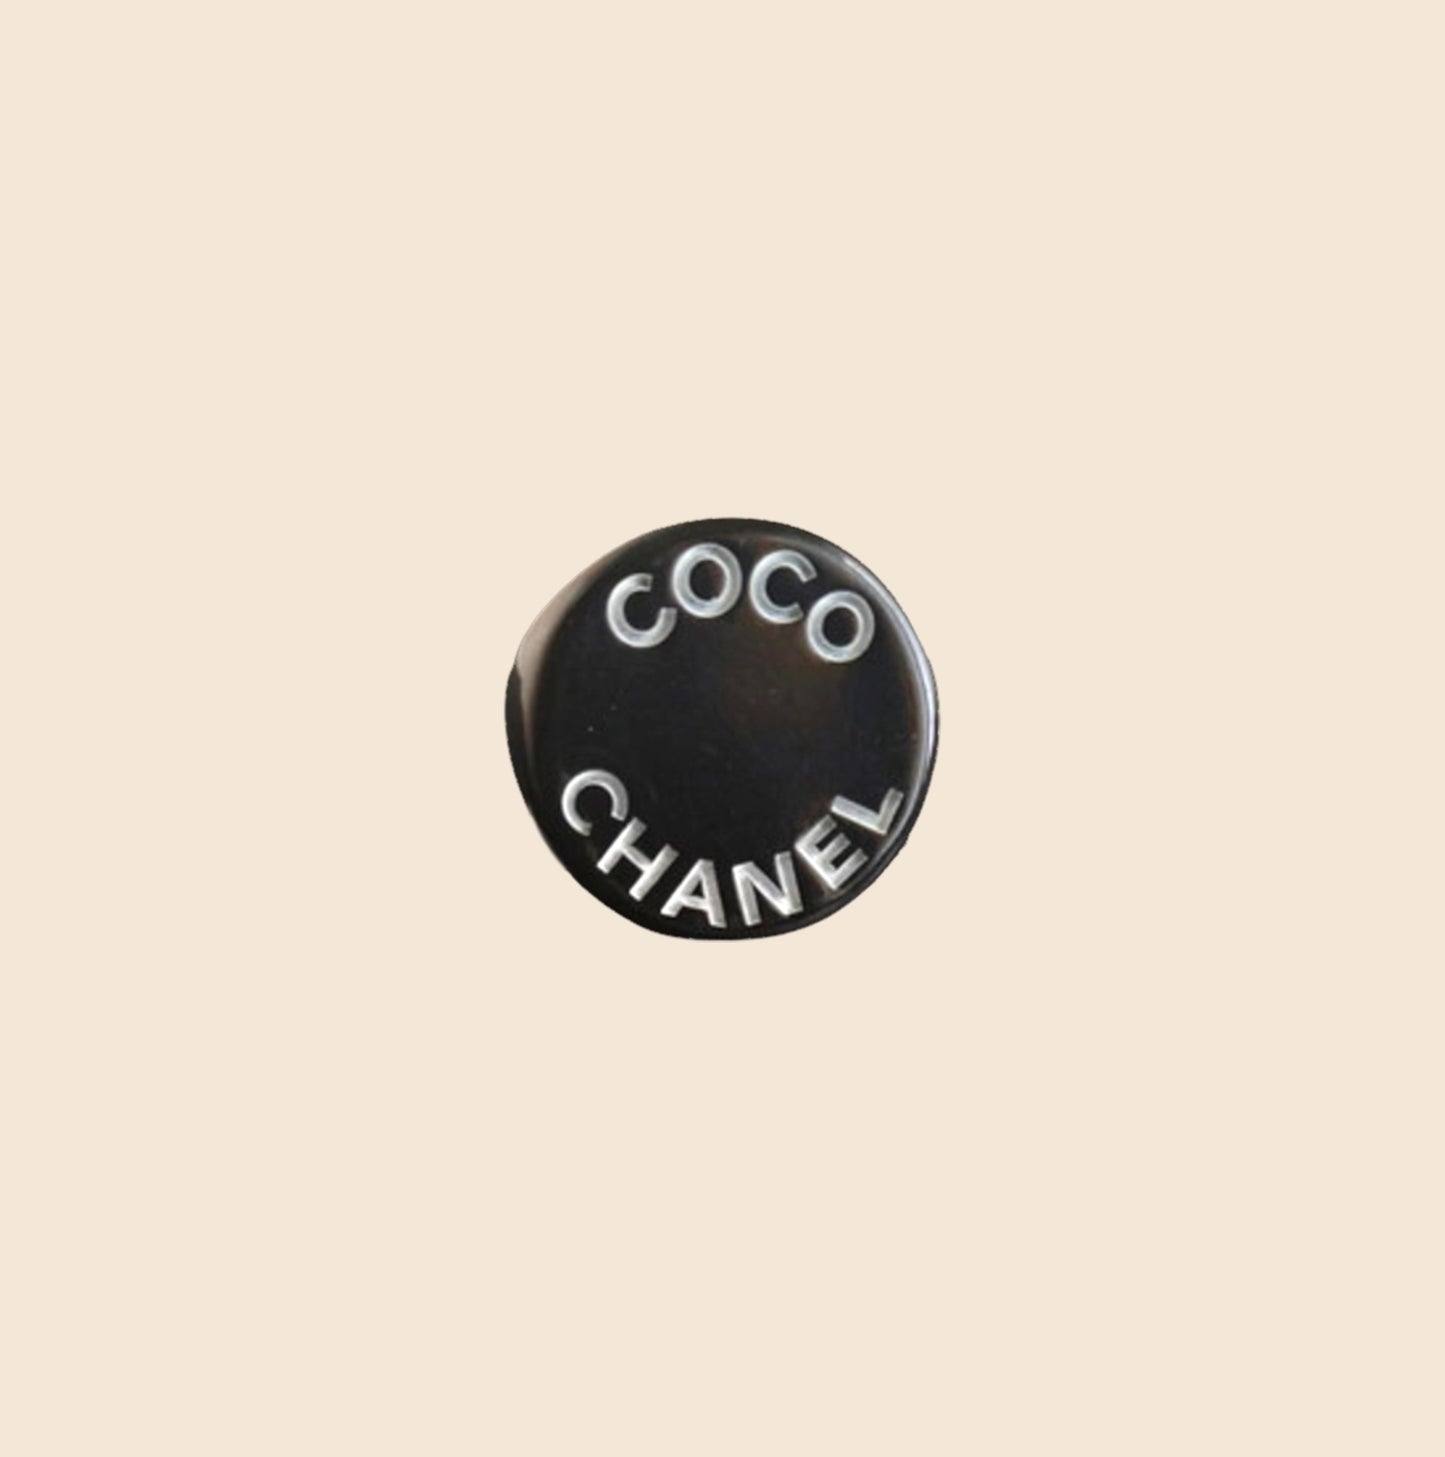 CHANEL "COCO CHANEL" RESIN RING